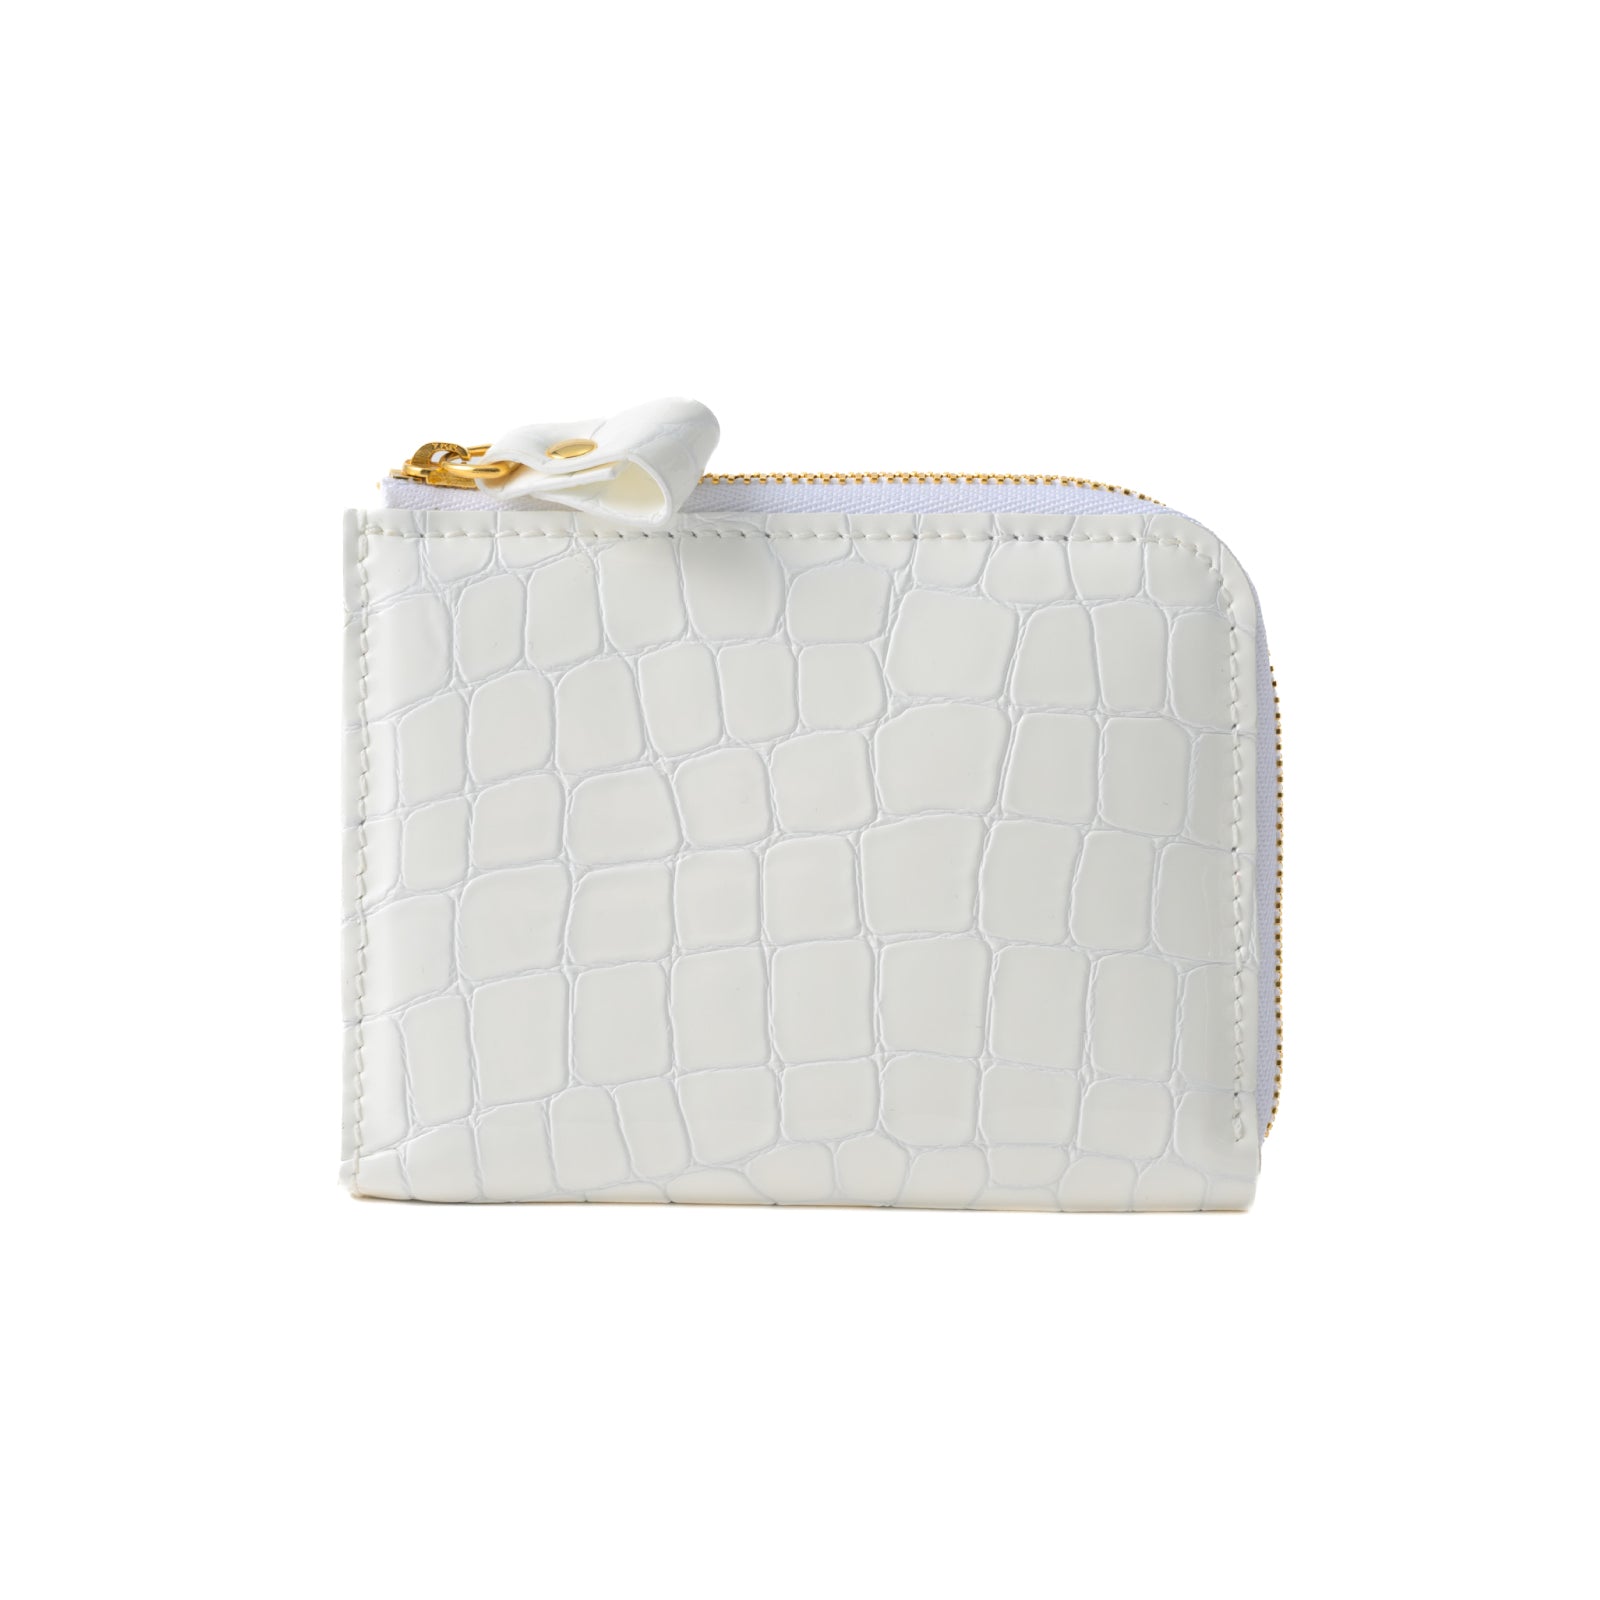 L-shaped zipper minimal wallet in Chromer leather / Pure White